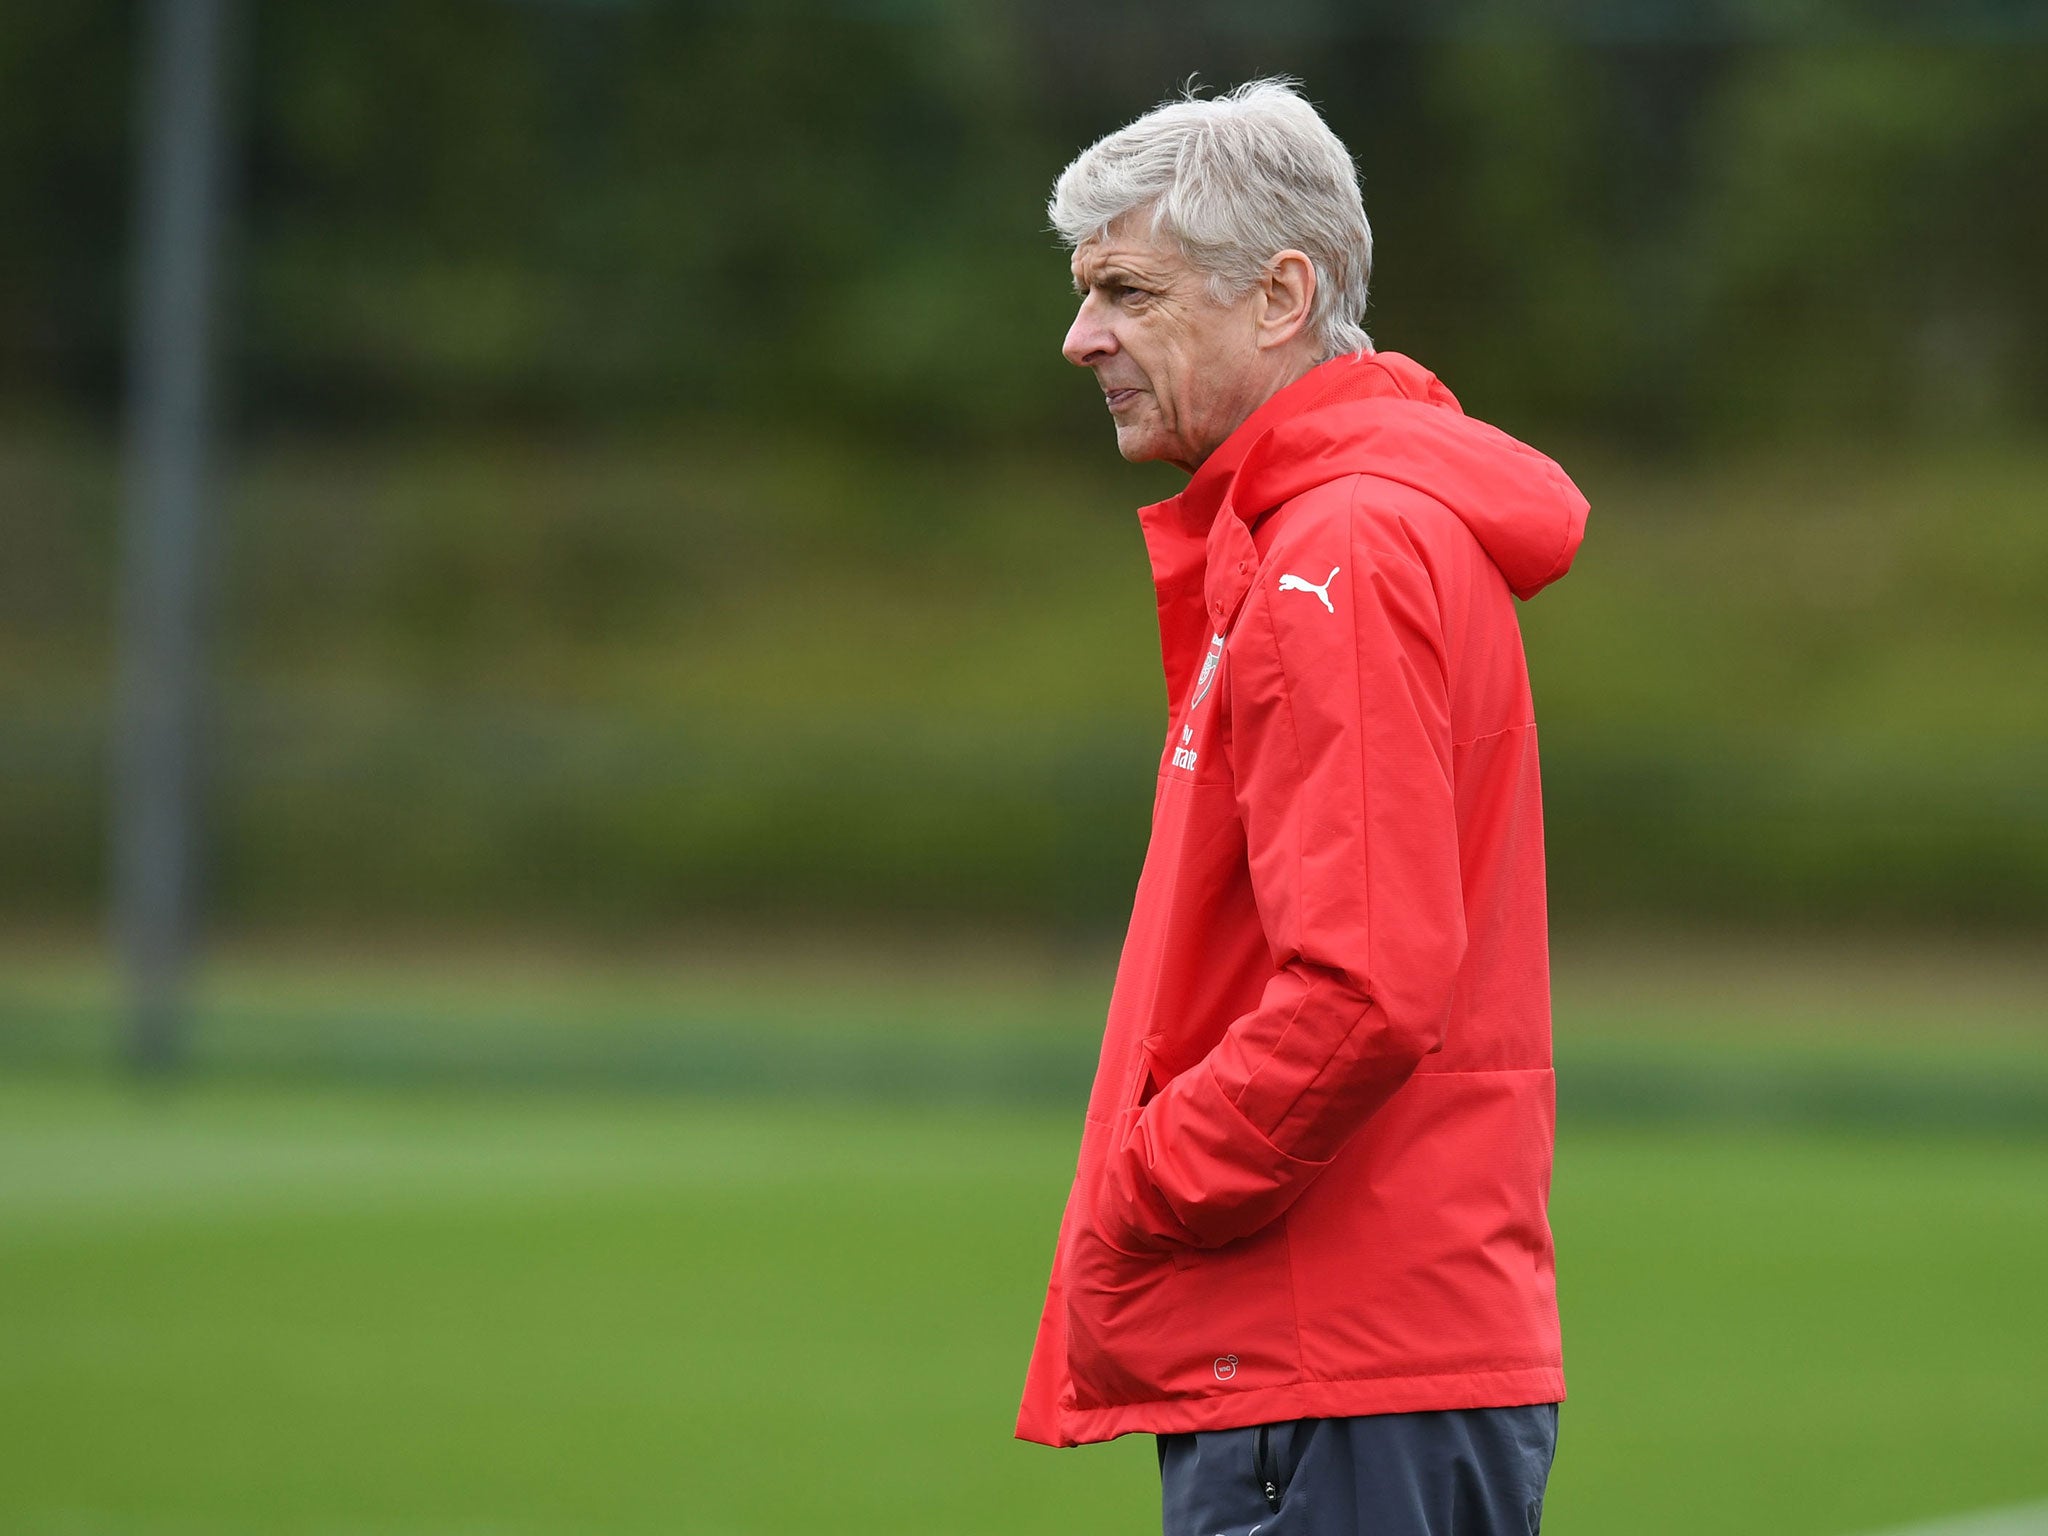 Wenger expressed his dismay at the protesters